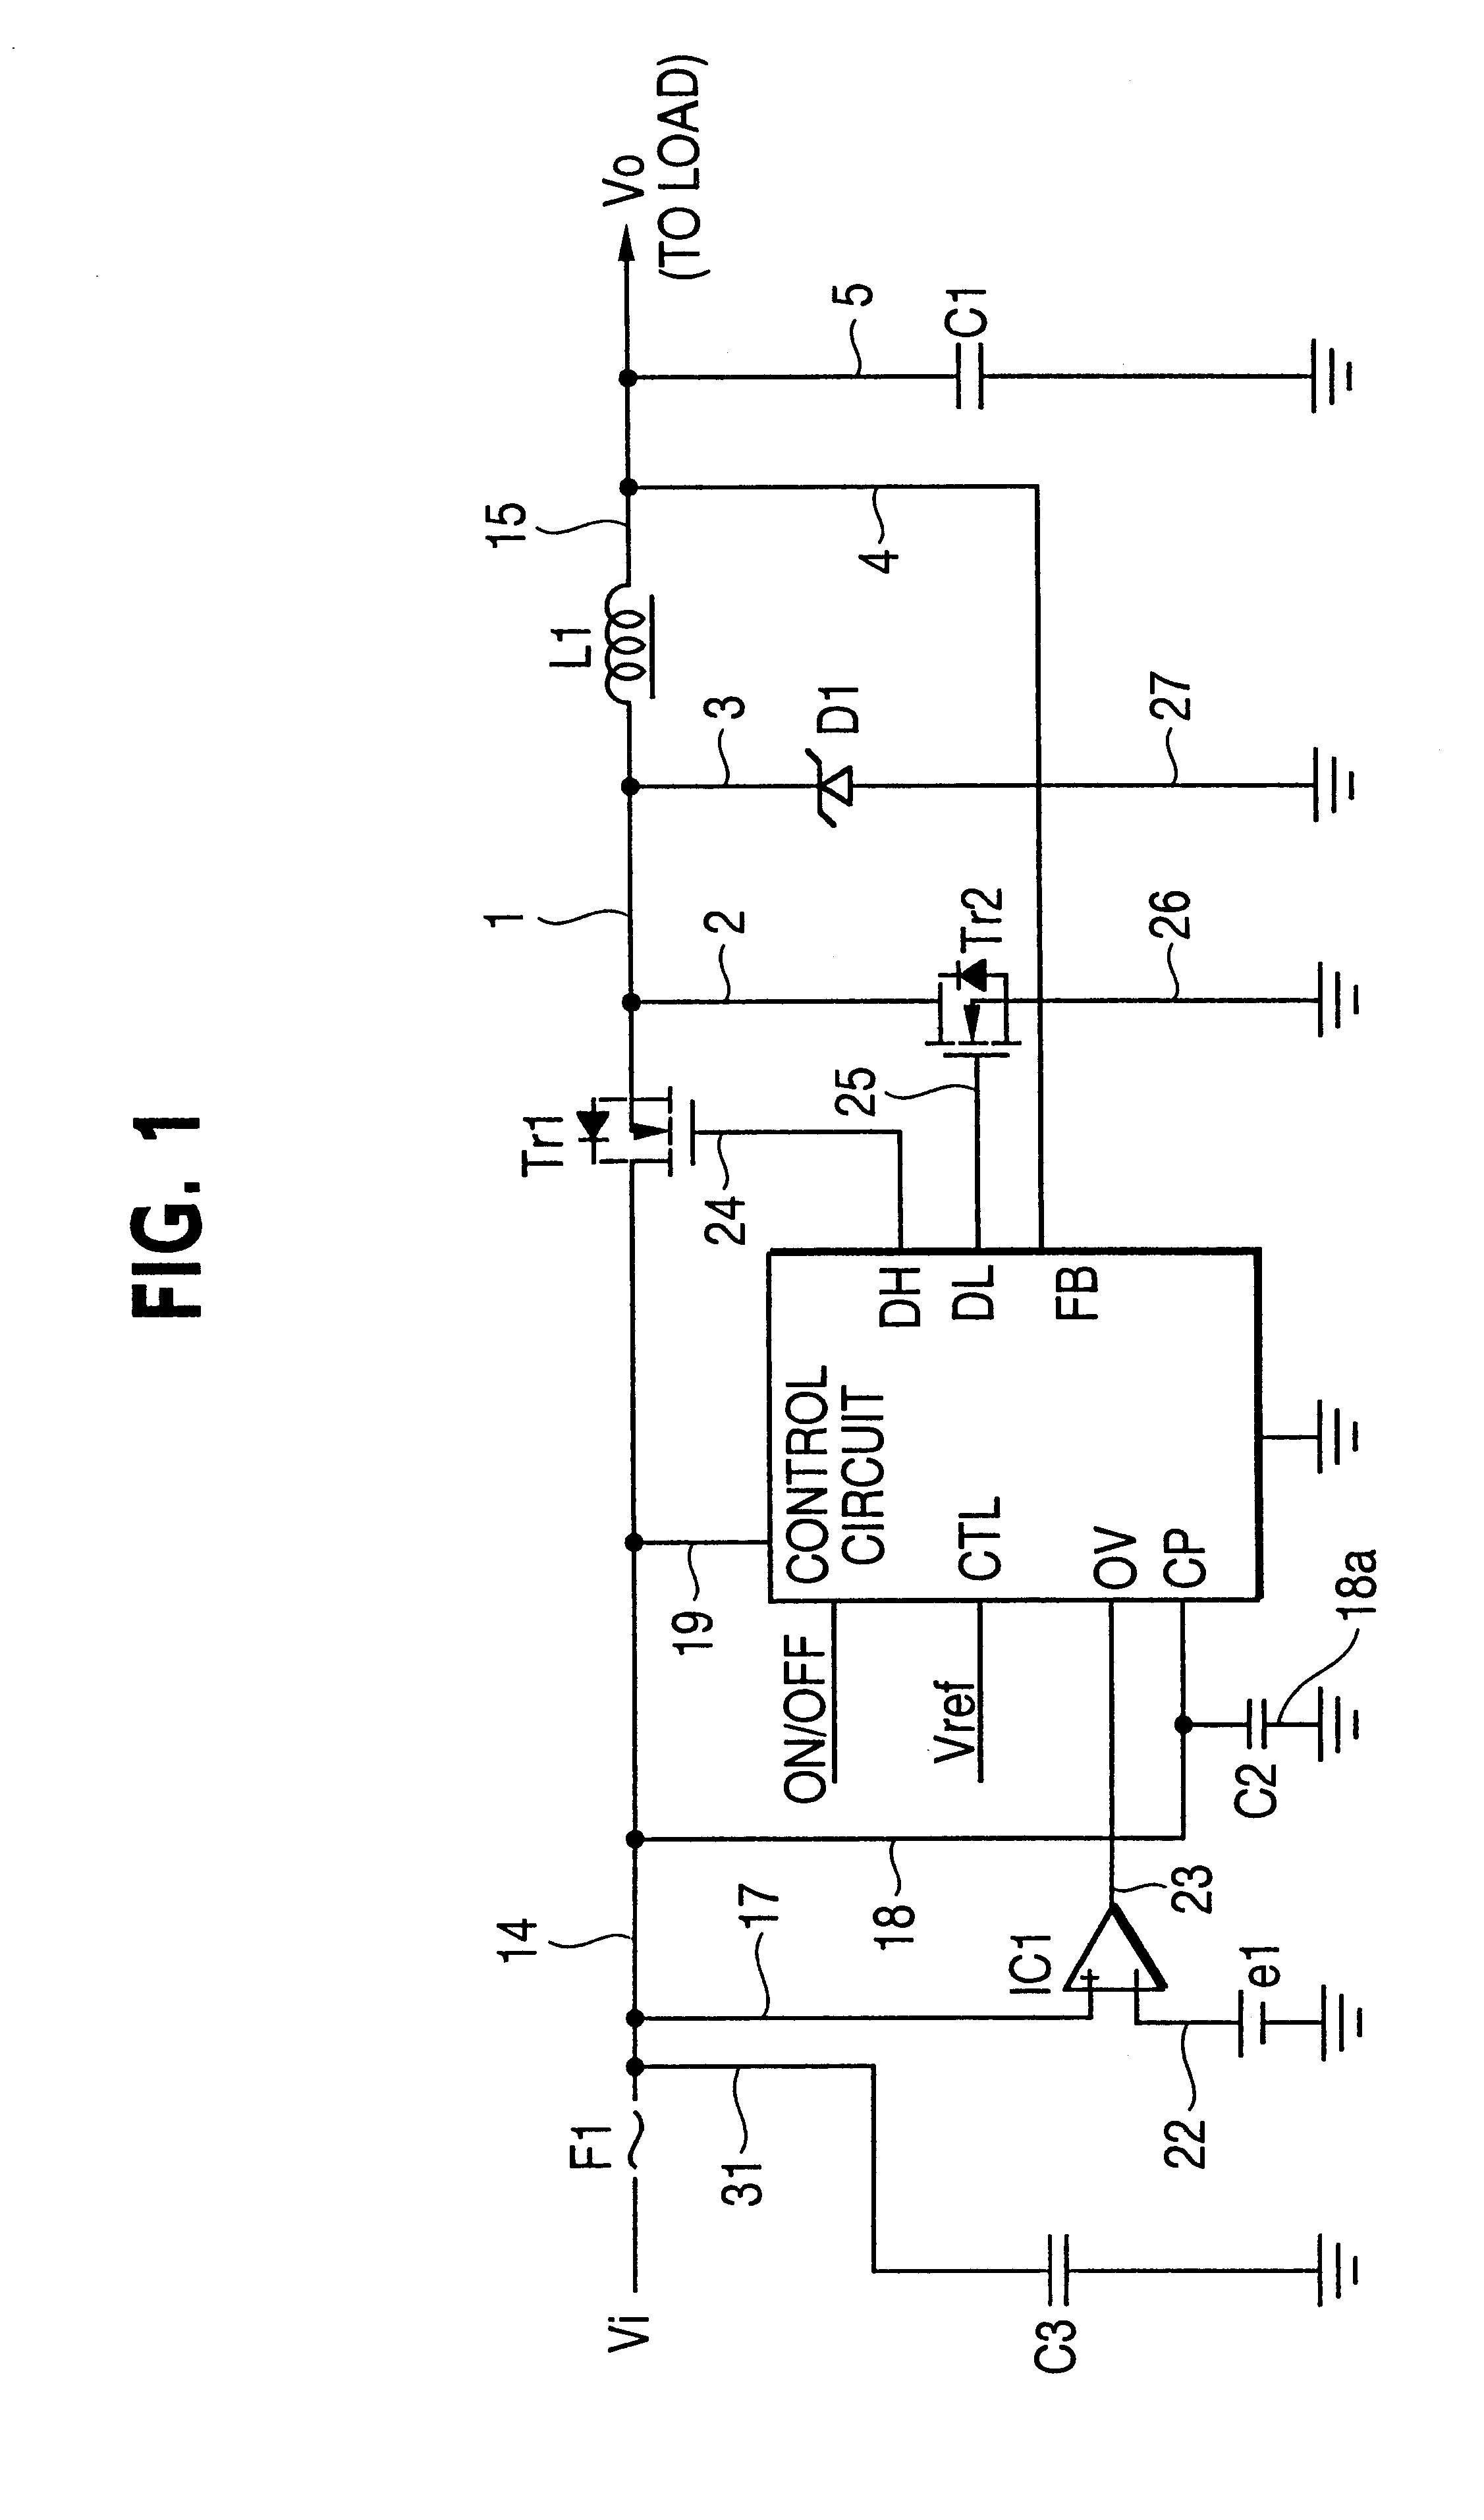 DC-to-DC converter capable of preventing overvoltage